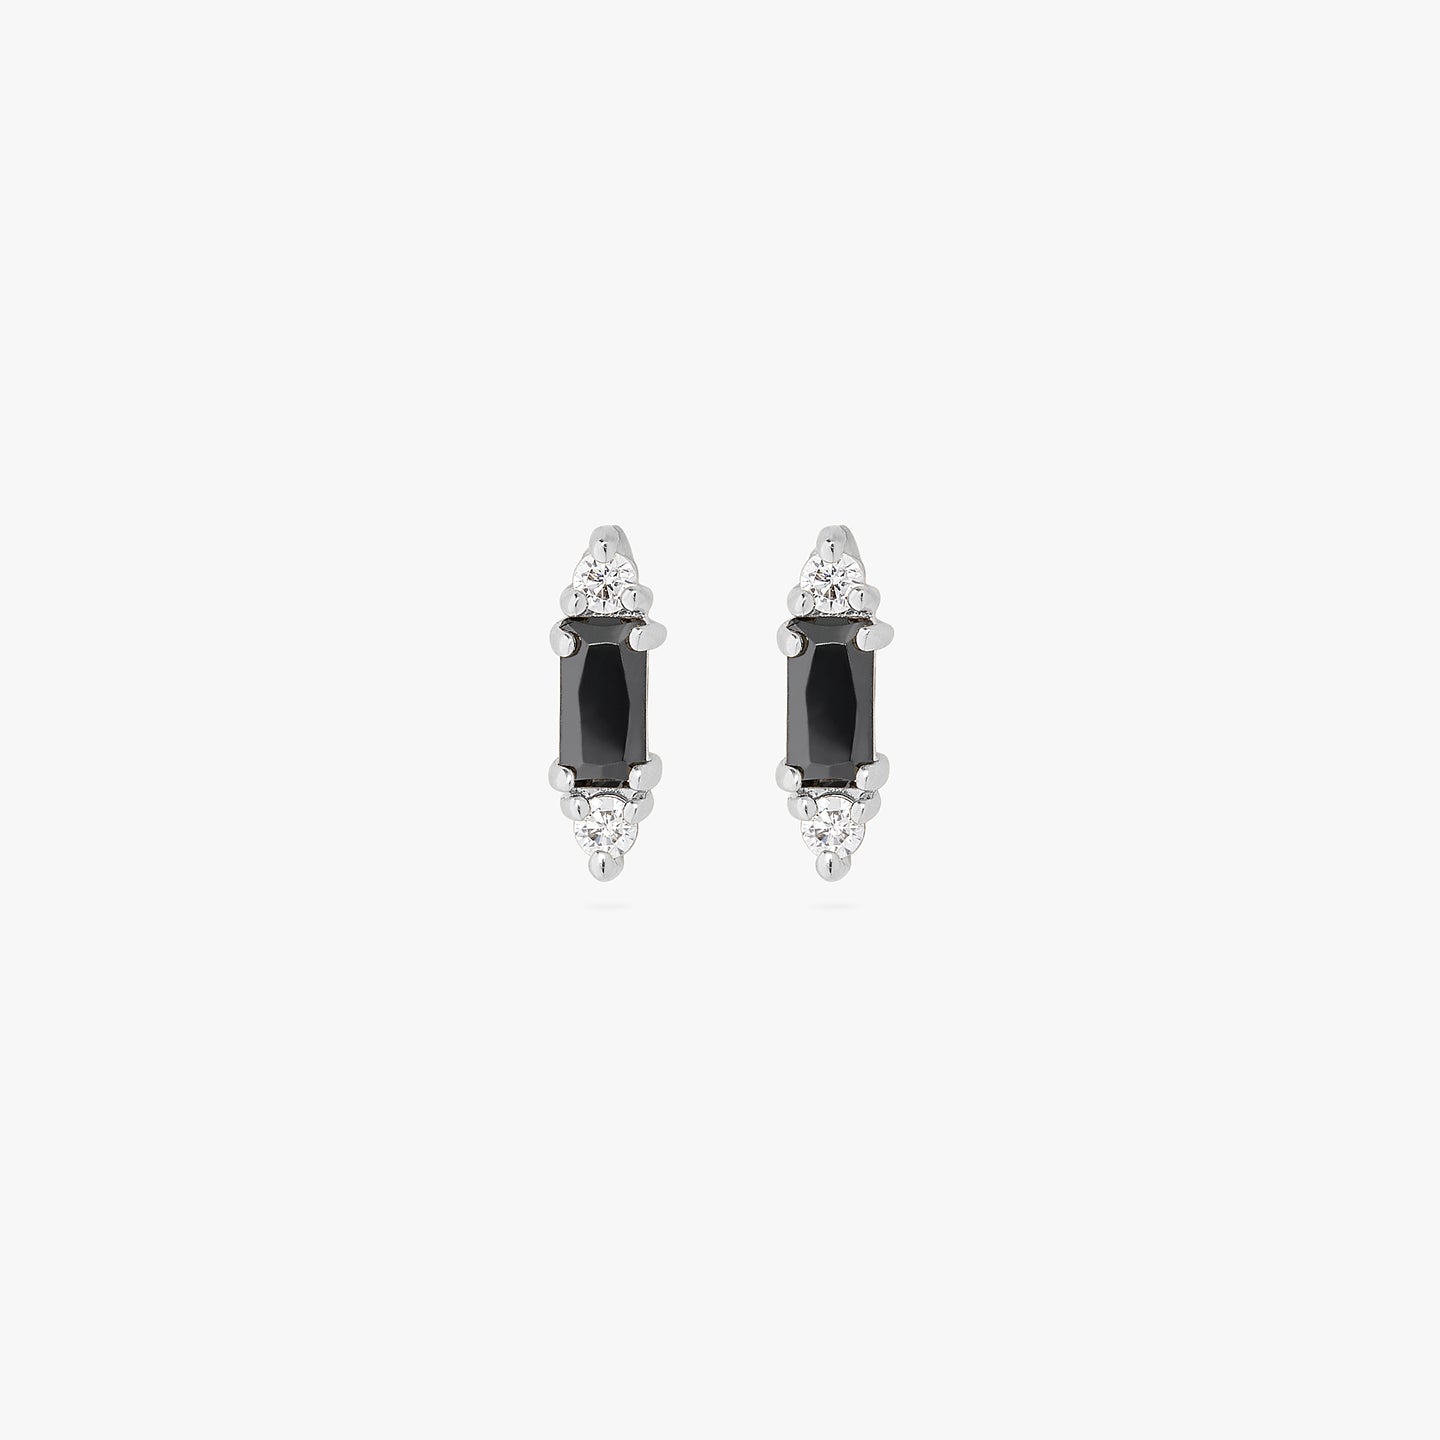 A pair of black baguette-shaped CZ studs with two silver/clear CZs on the end of the baguette. color:null|silver/black